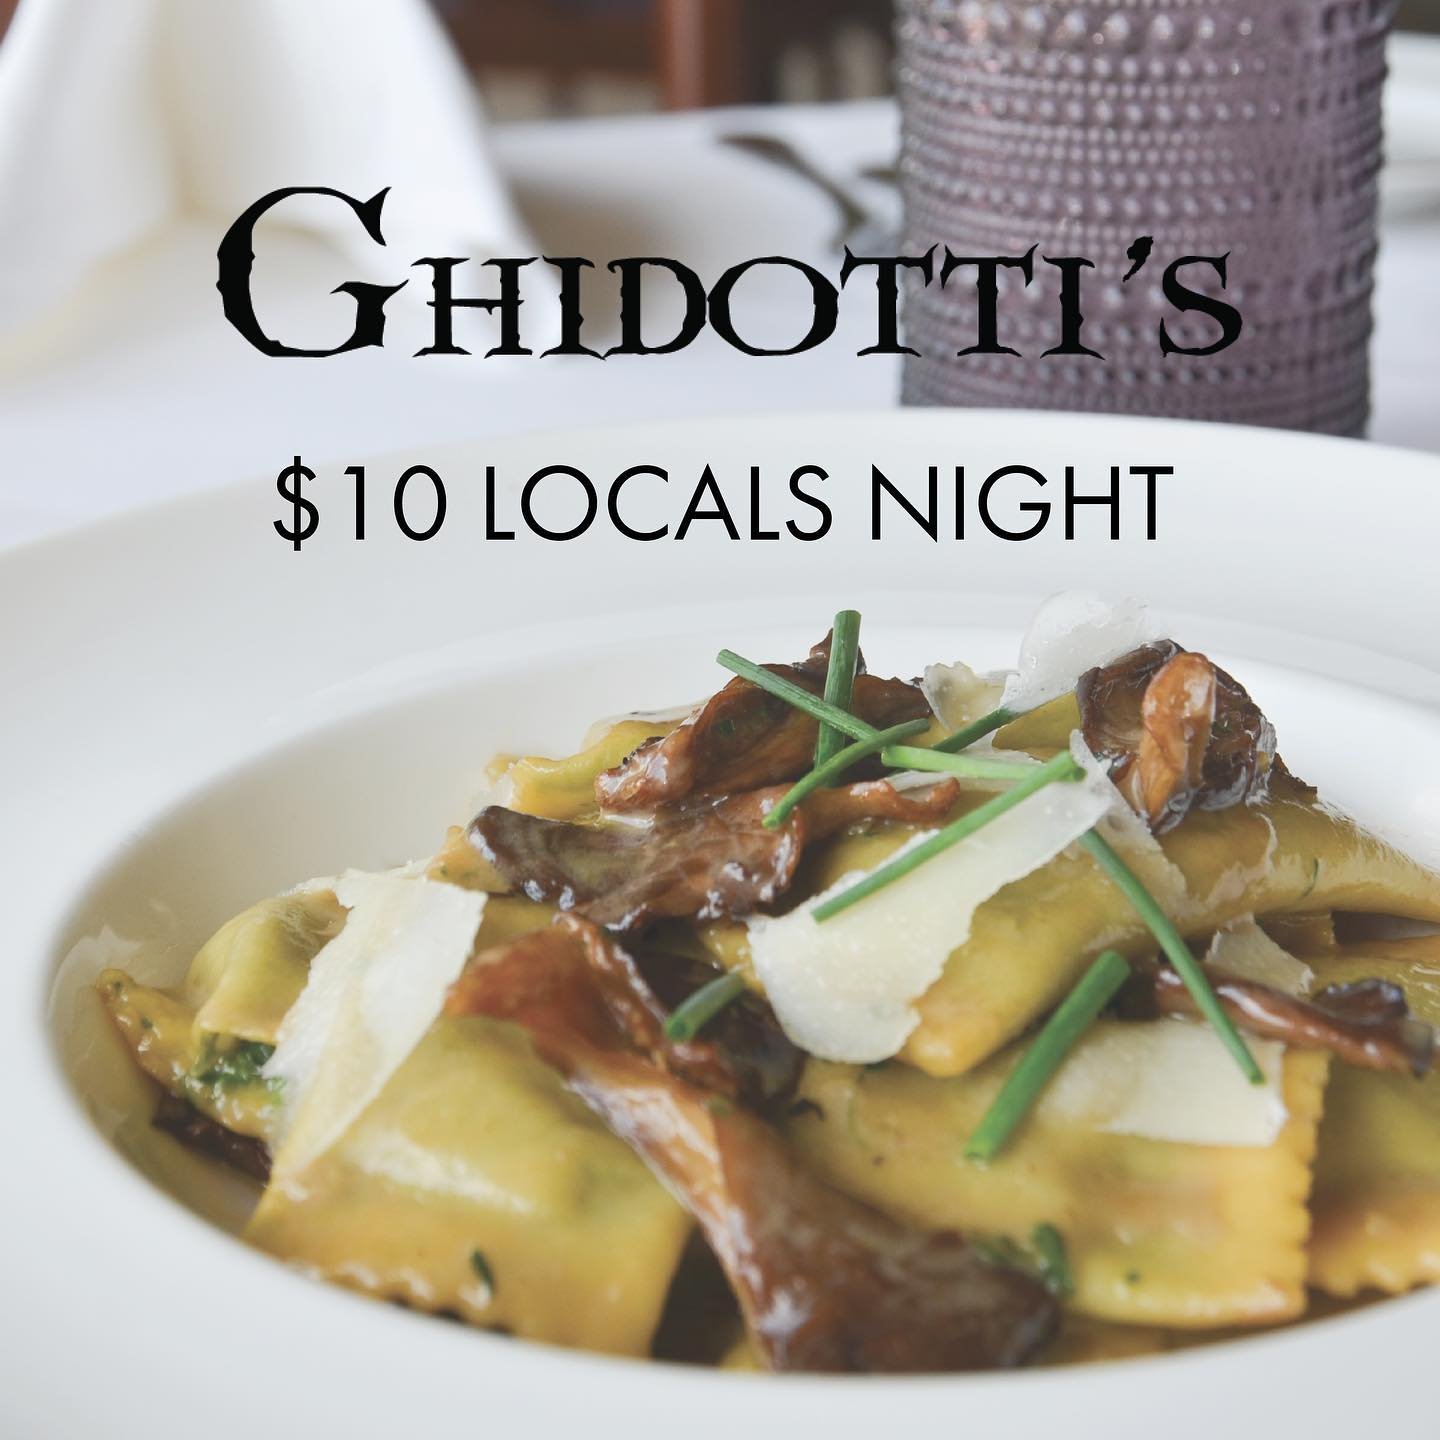 $10 LOCALS NIGHT STARTS TODAY!
Come on in and enjoy pasta, salads, and appetizers for $10 every THURSDAY in august and September 
&bull;
&bull;
&bull;
&bull;
&nbsp;#Ghidottis #parkcity #parkcityeats #foodandwine #wine #finedining #foodie #bestrestaur